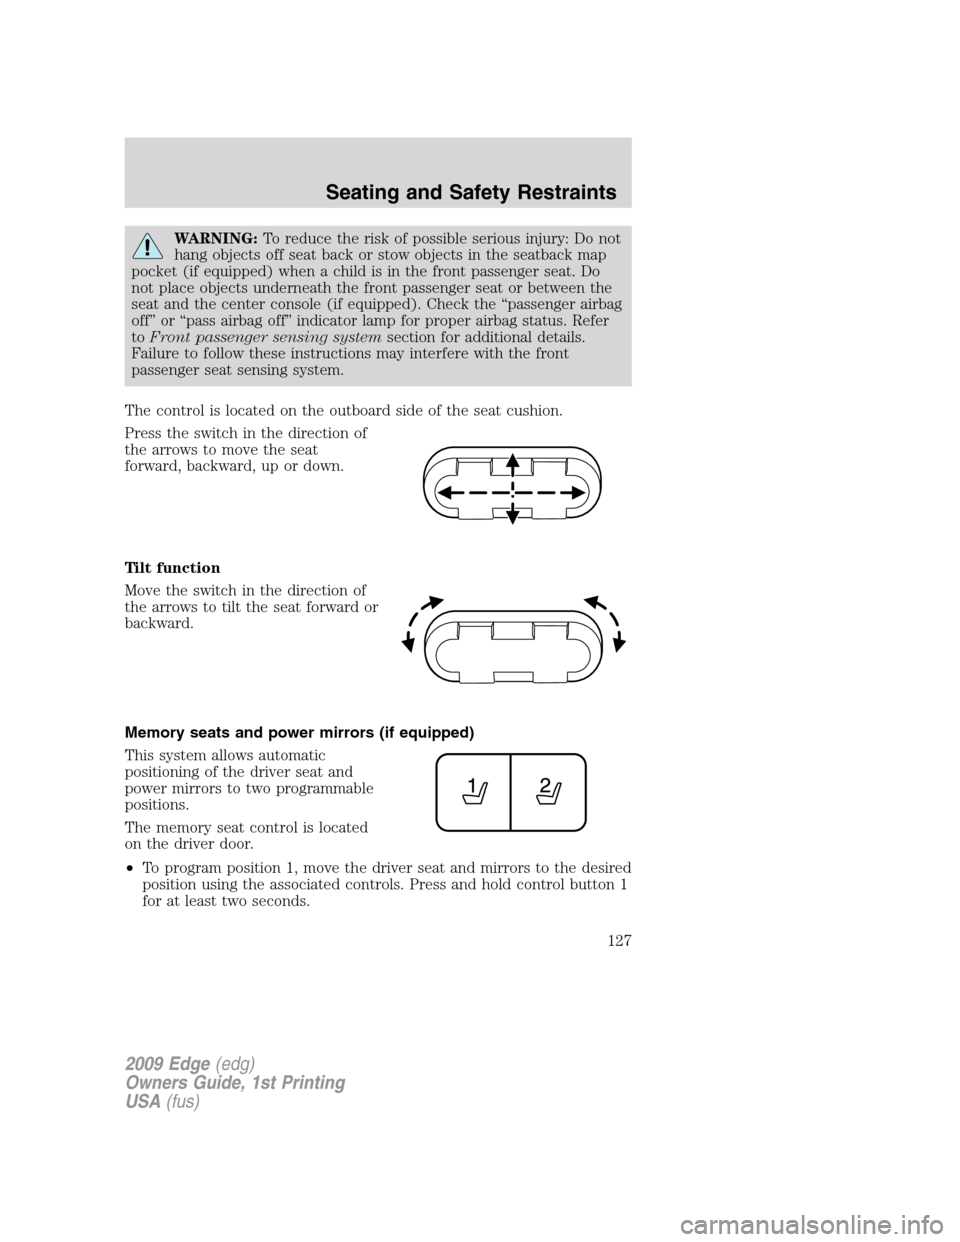 FORD EDGE 2009 1.G Owners Manual WARNING:To reduce the risk of possible serious injury: Do not
hang objects off seat back or stow objects in the seatback map
pocket (if equipped) when a child is in the front passenger seat. Do
not pl